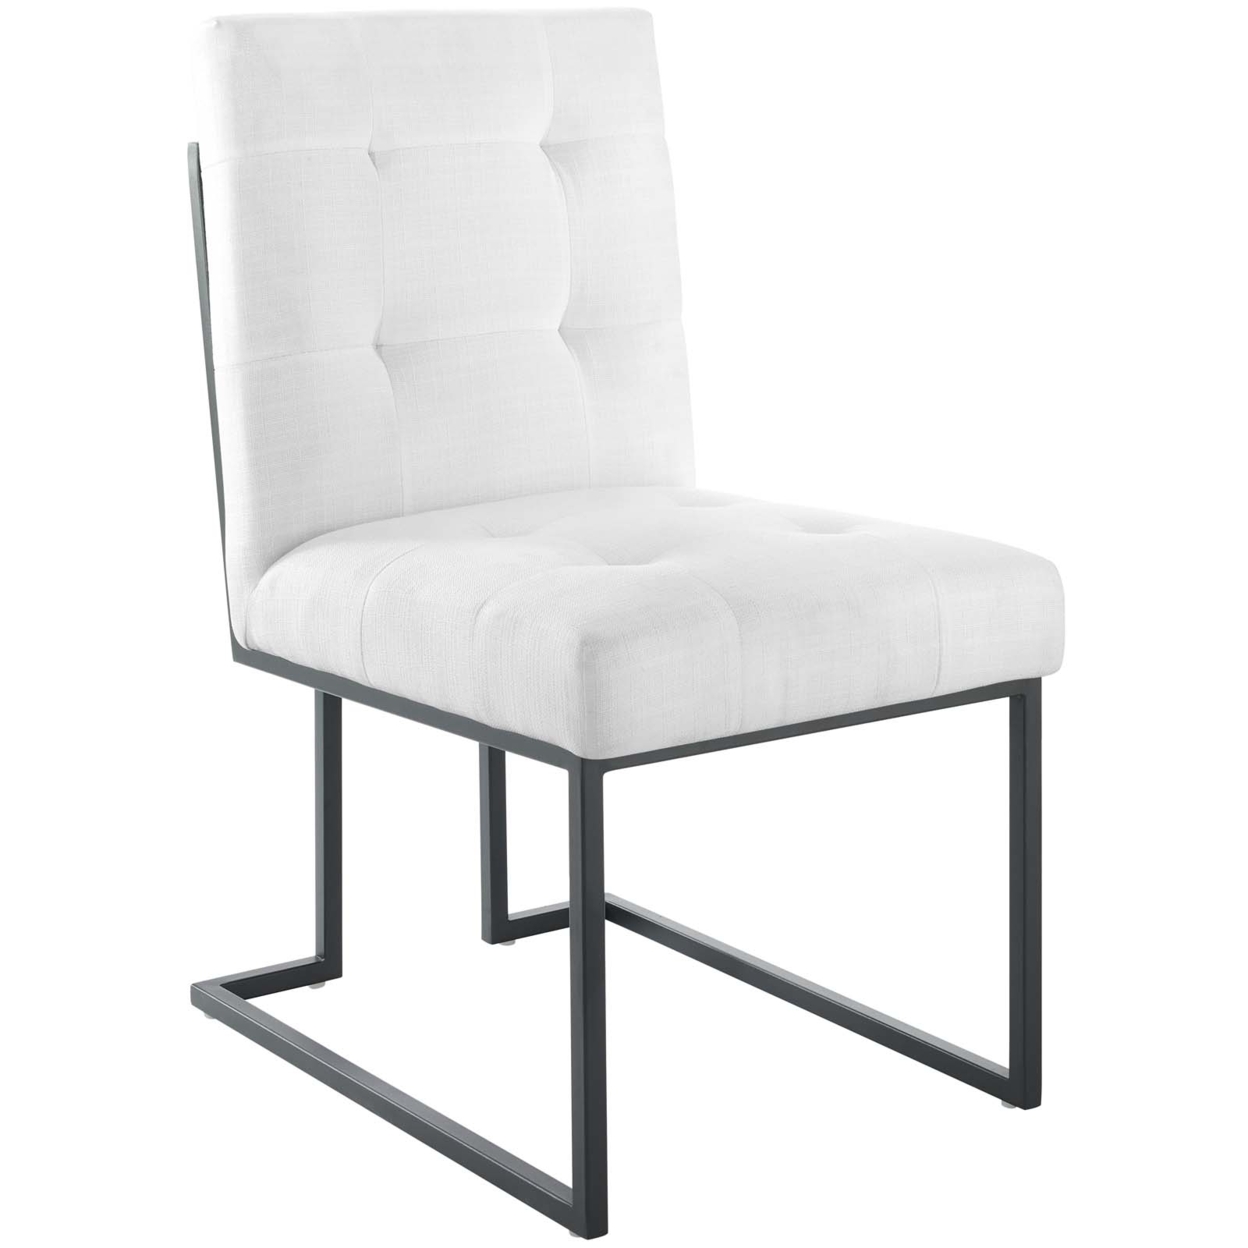 Privy Black Stainless Steel Upholstered Fabric Dining Chair,Black White